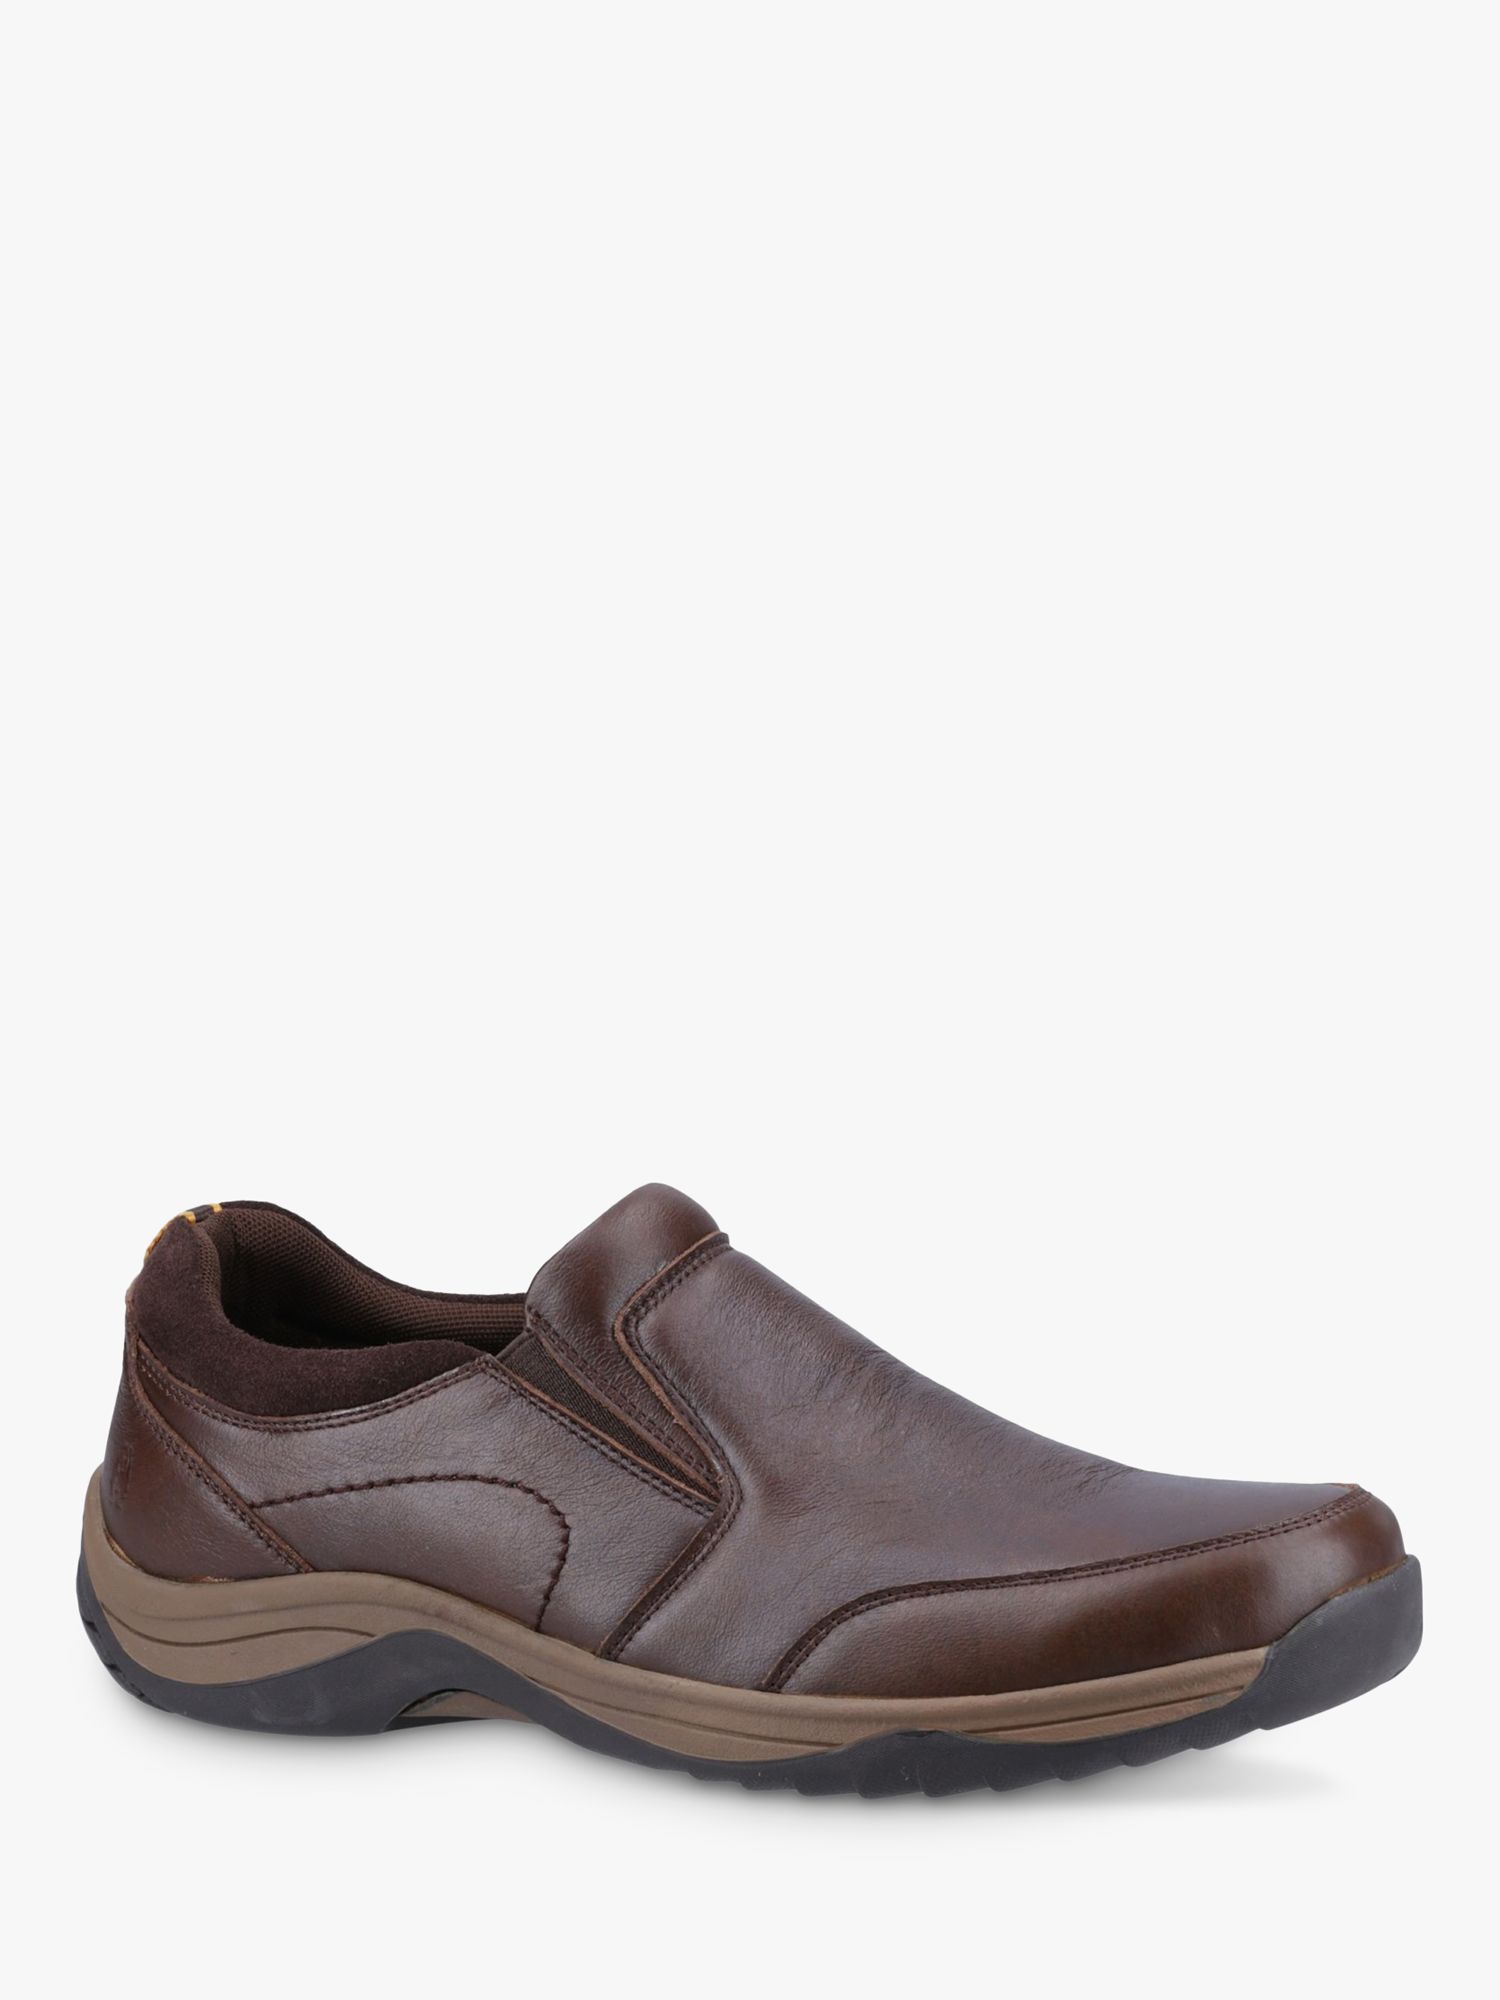 Buy Hush Puppies Donald Leather Shoes, Coffee Online at johnlewis.com